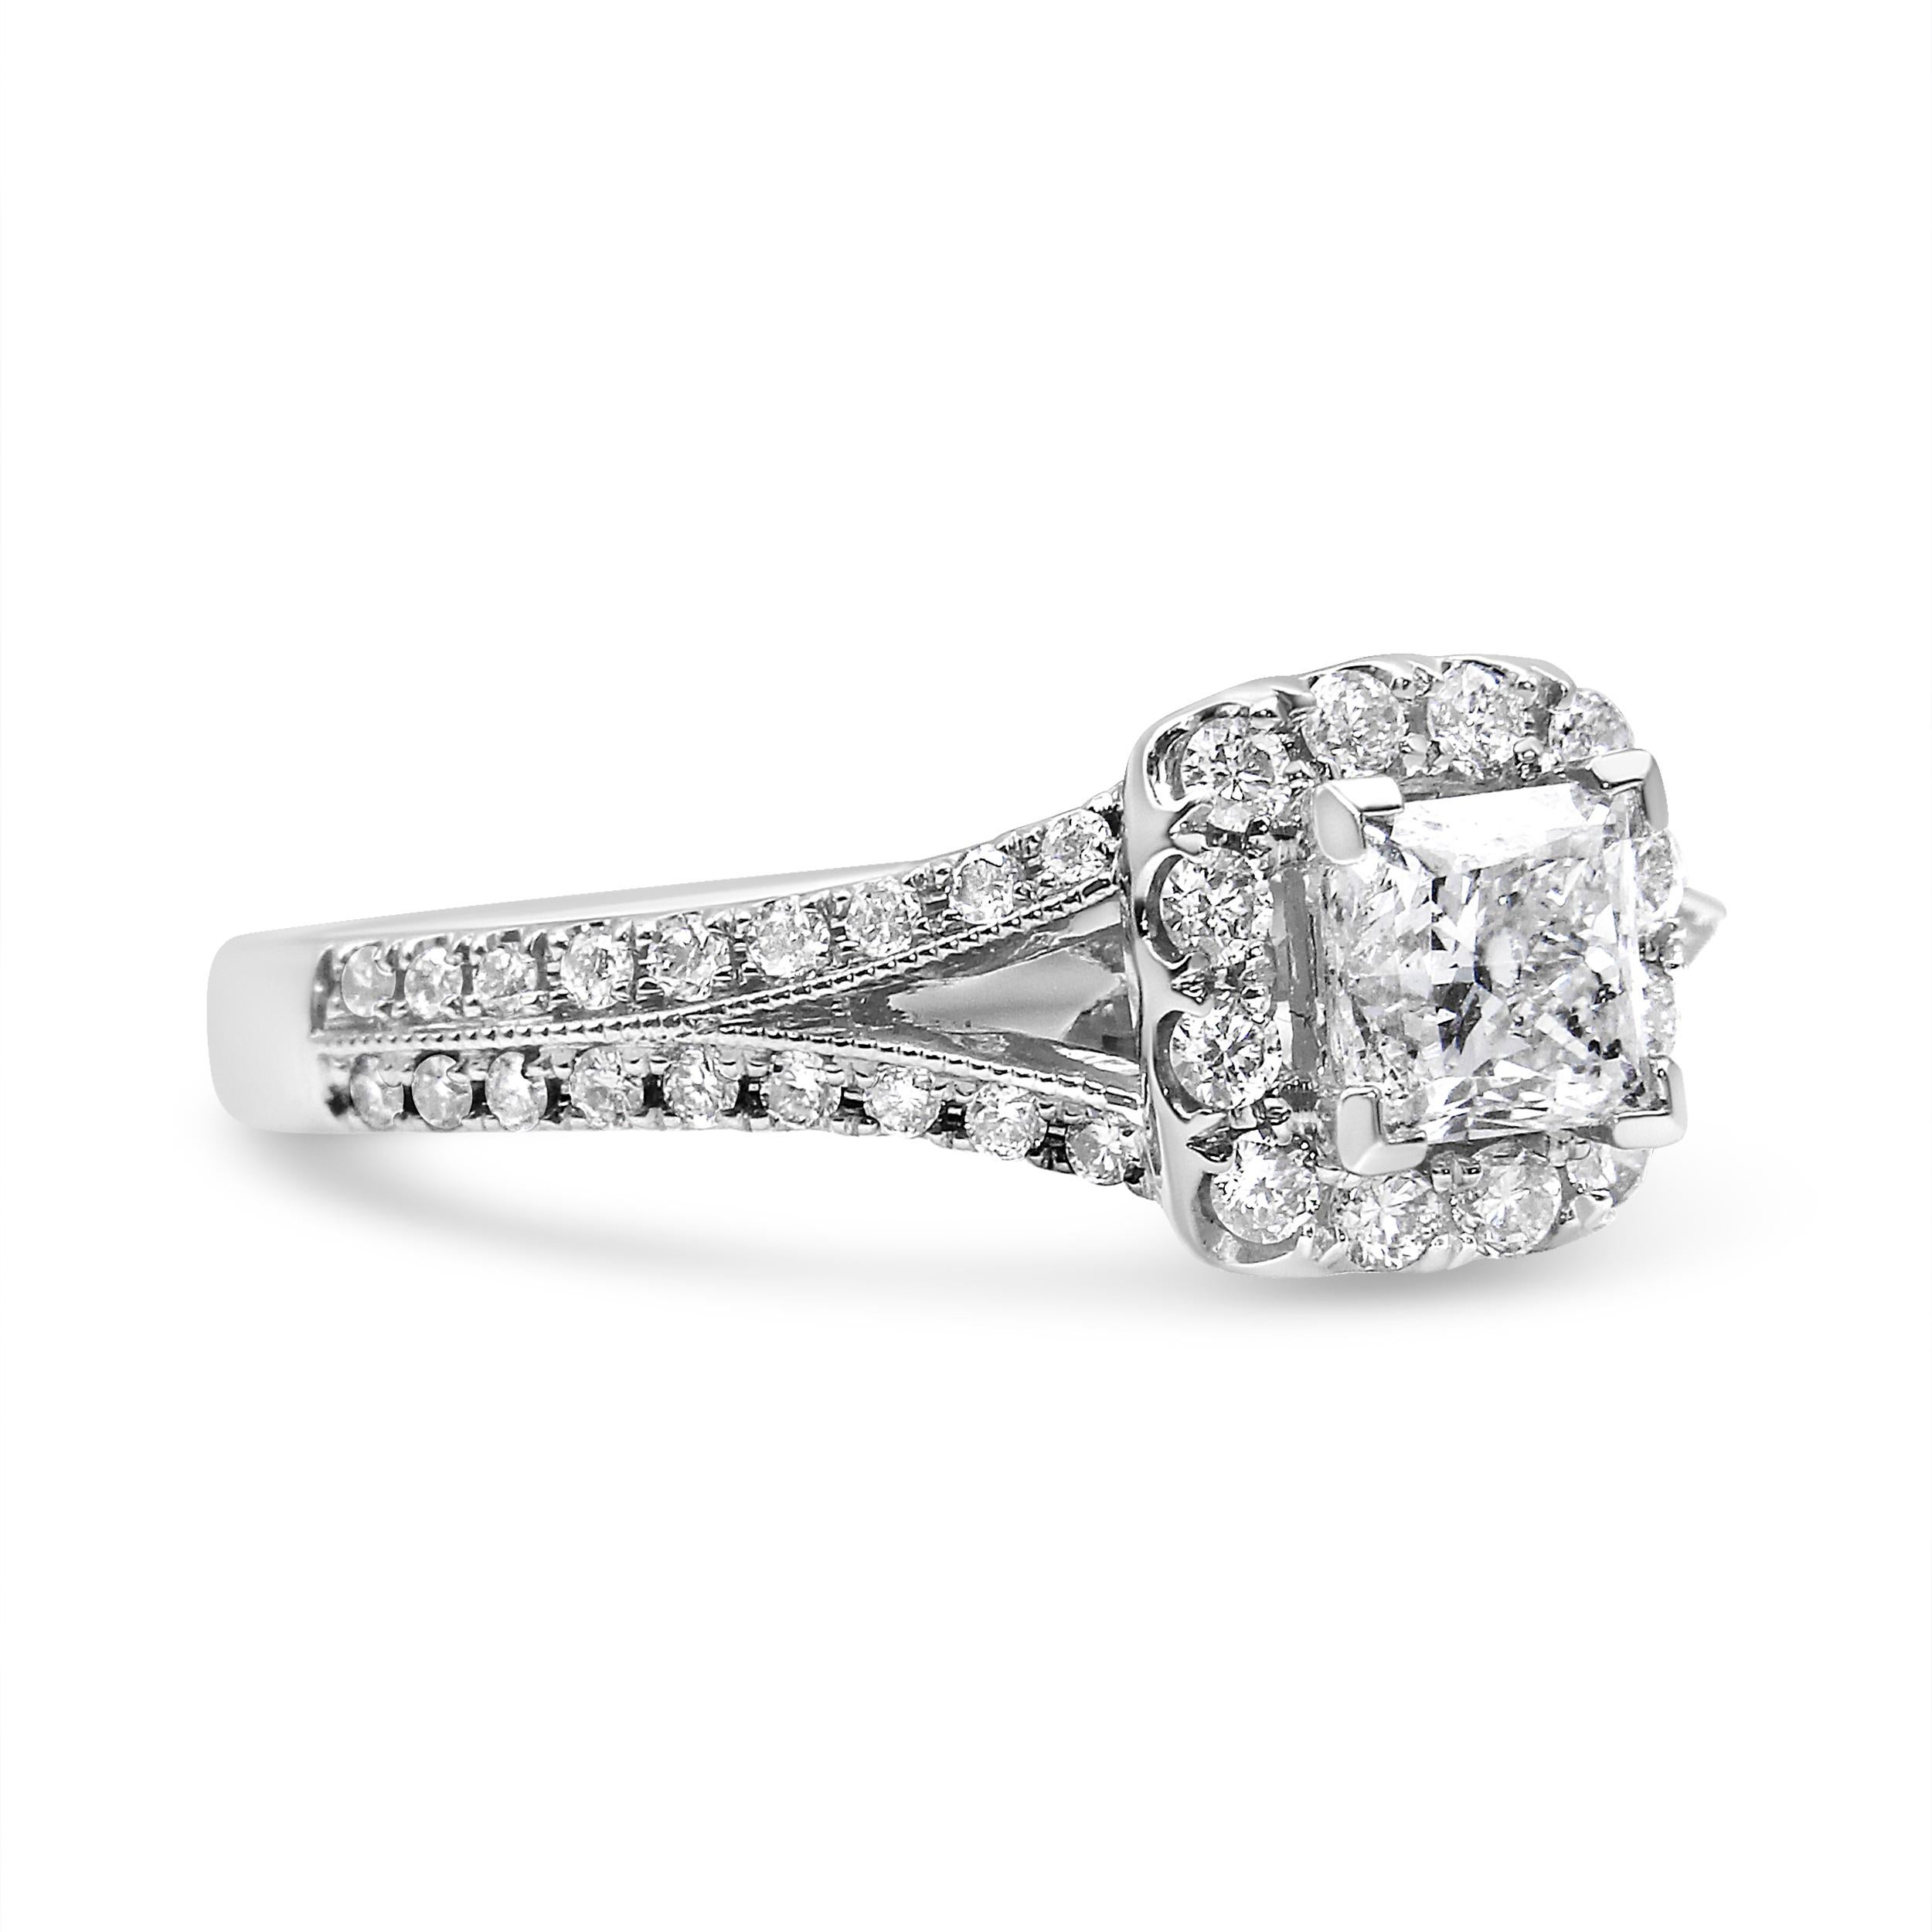 Elegant and modern, this beautiful 1.15 c.t. diamond engagement ring has a whimsical design that will stand out from the rings you've seen before. This ring is crafted in genuine 14k white gold, a metal that will stay tarnish free for years to come.